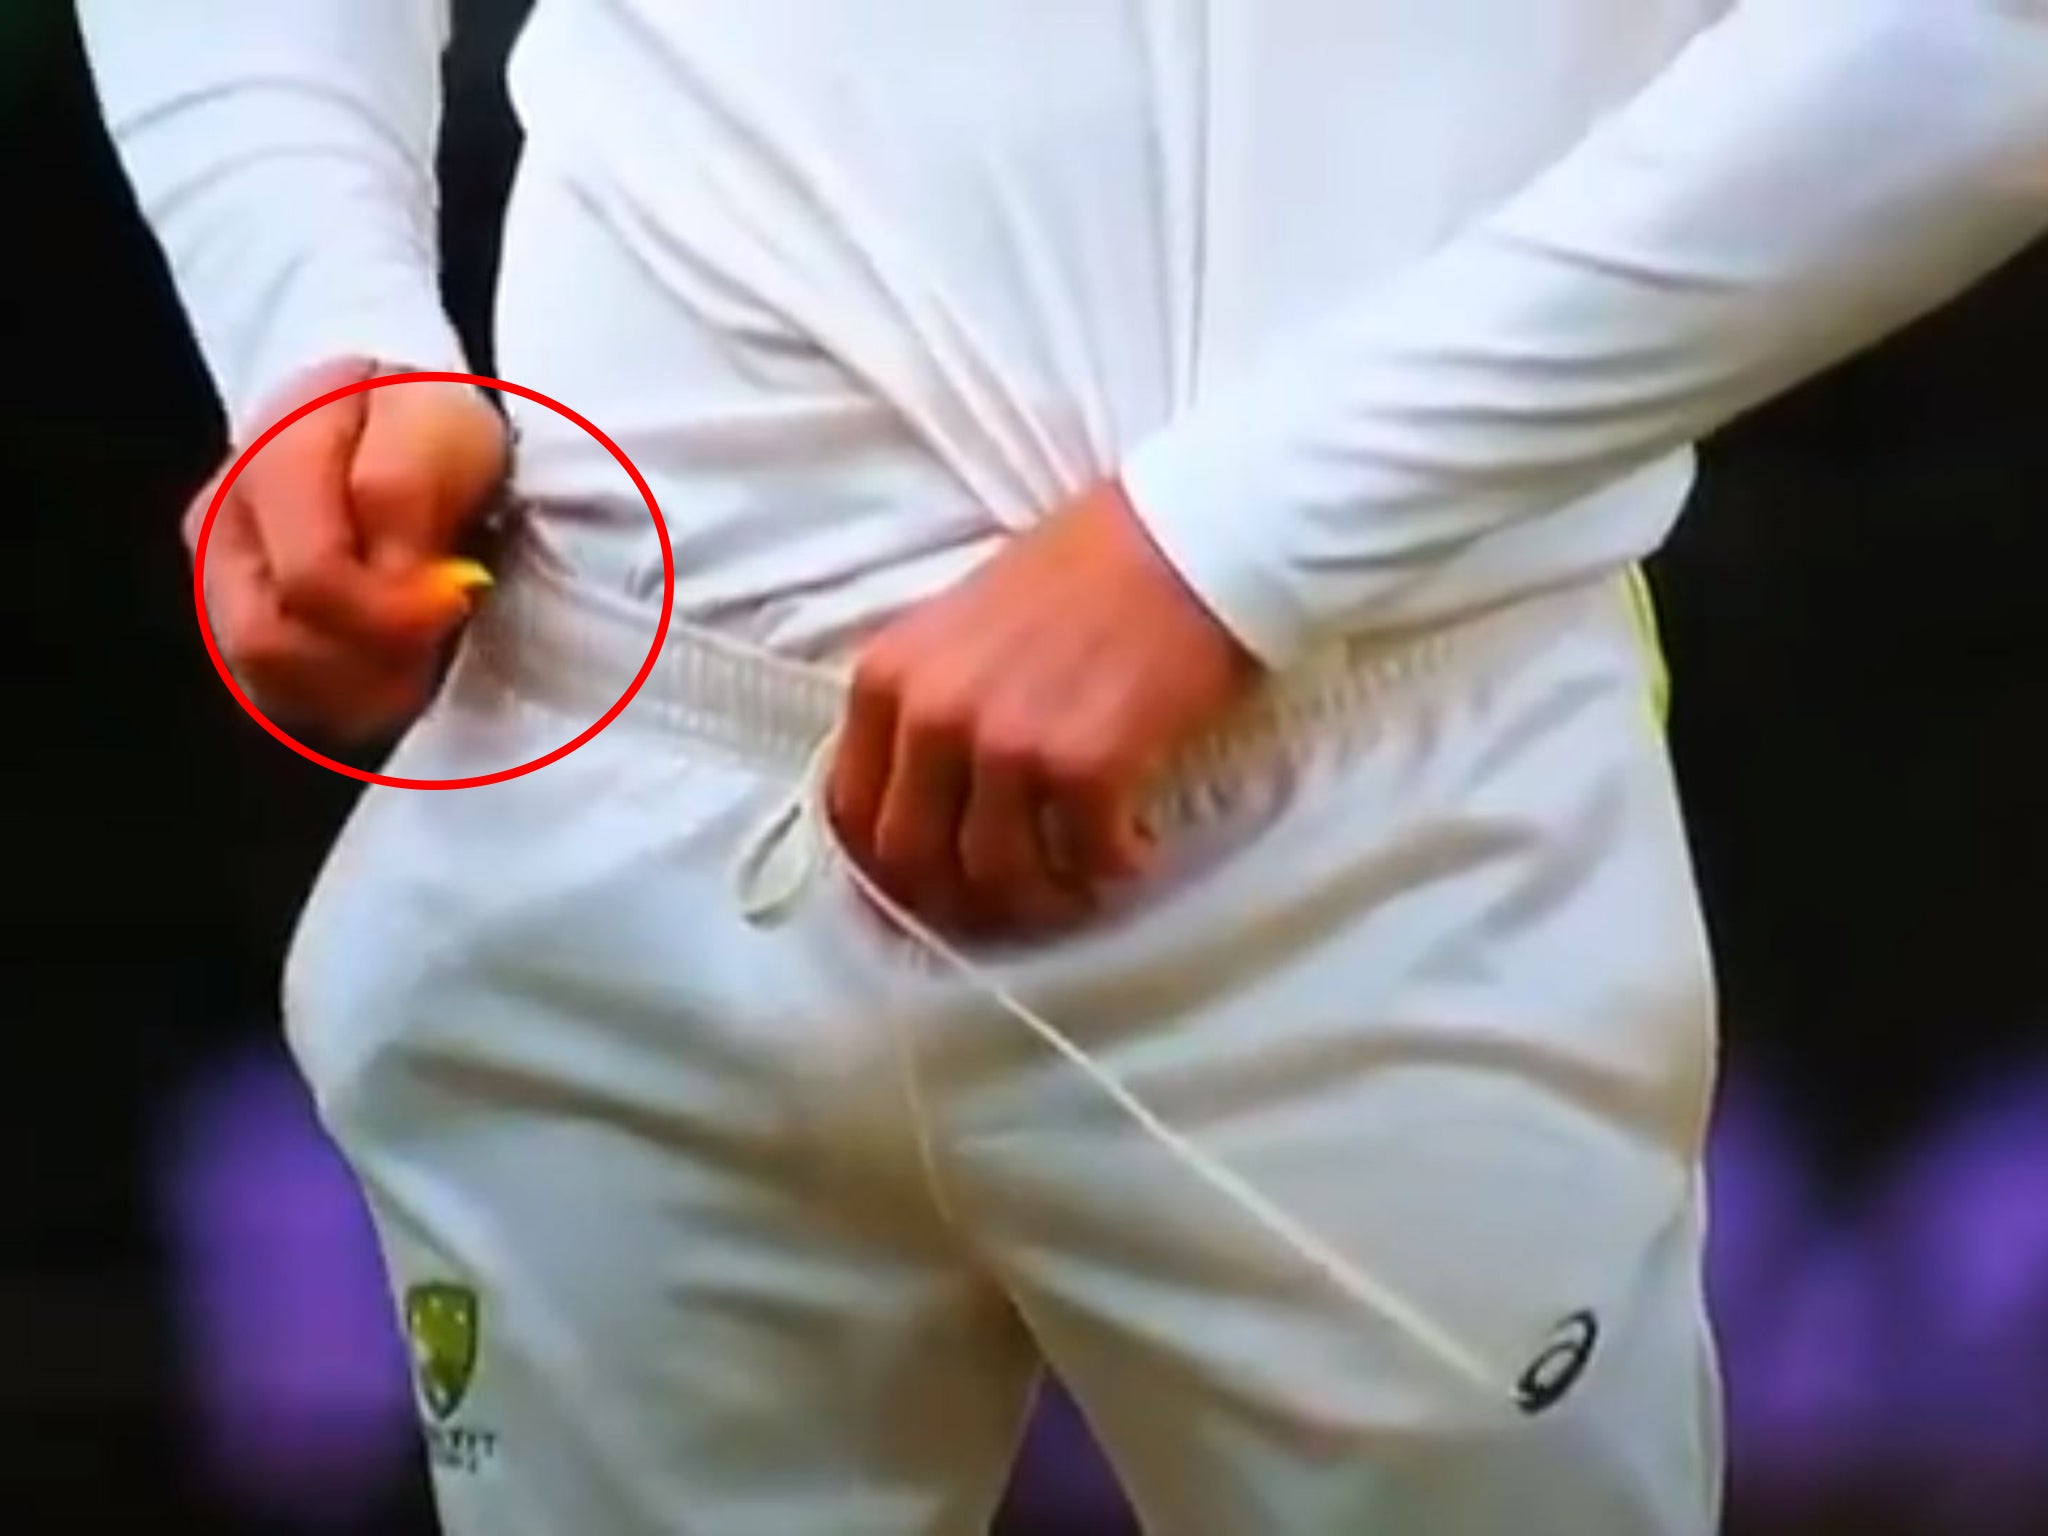 Bancroft appeared to produce an object from his trouser pocket while working on the ball